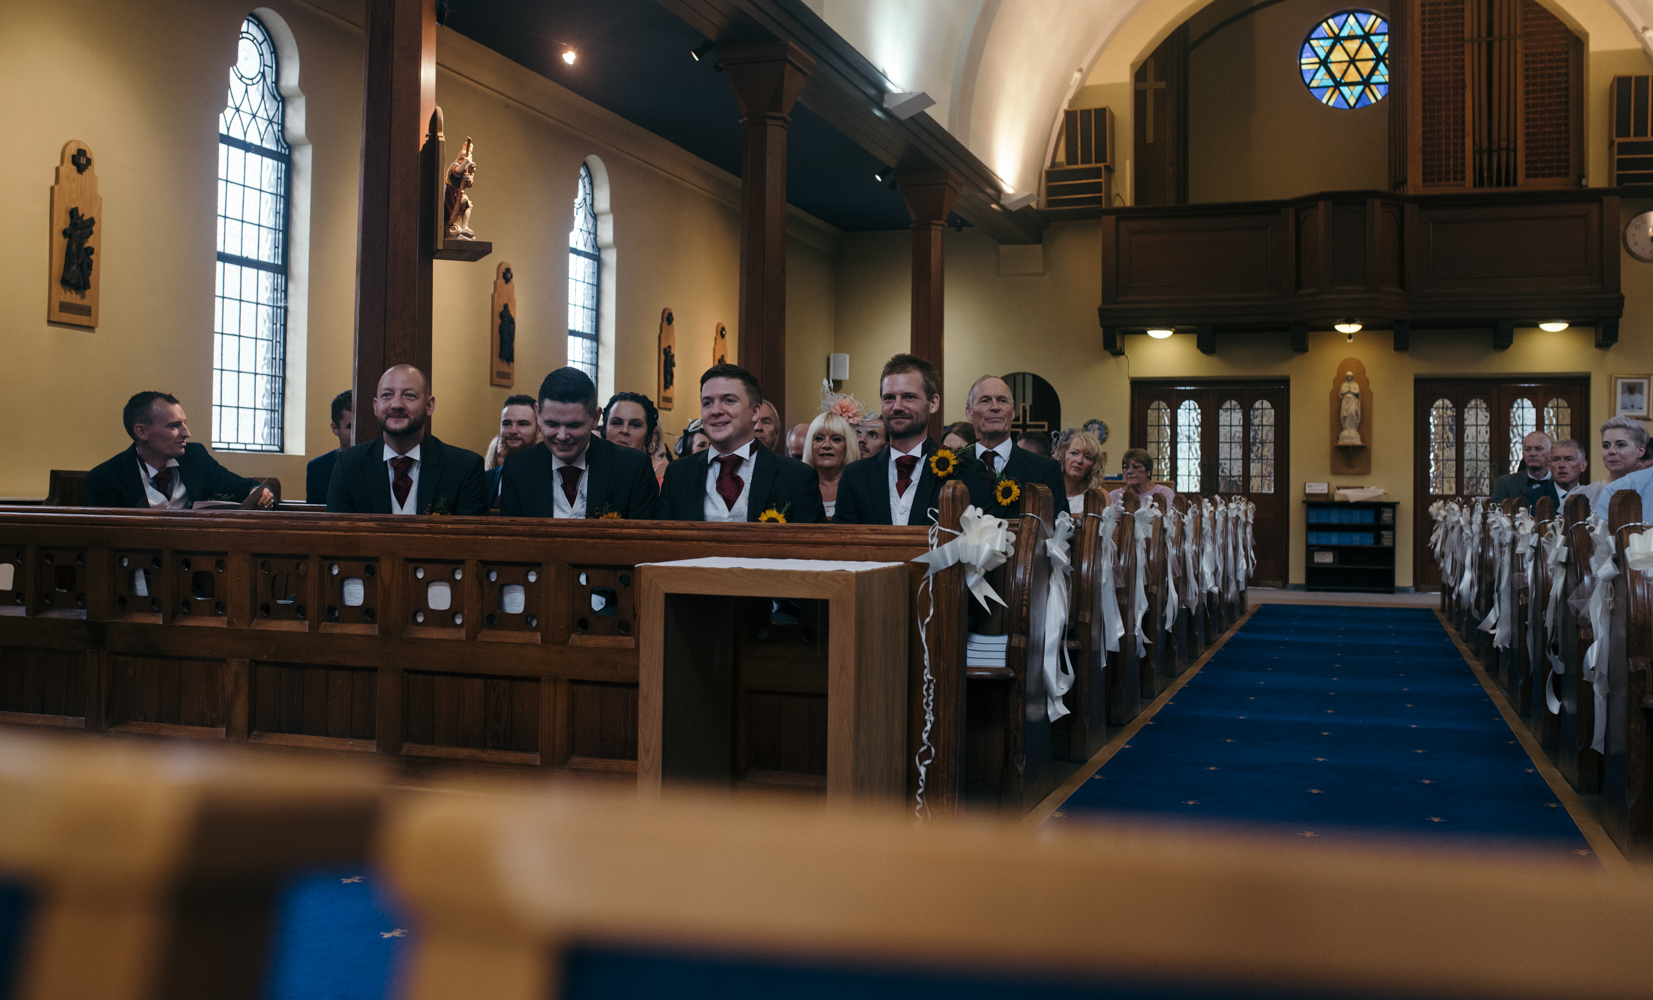 The groom best man and ushers sitting in the front rows of the church waiting for the bride and her father to arrive